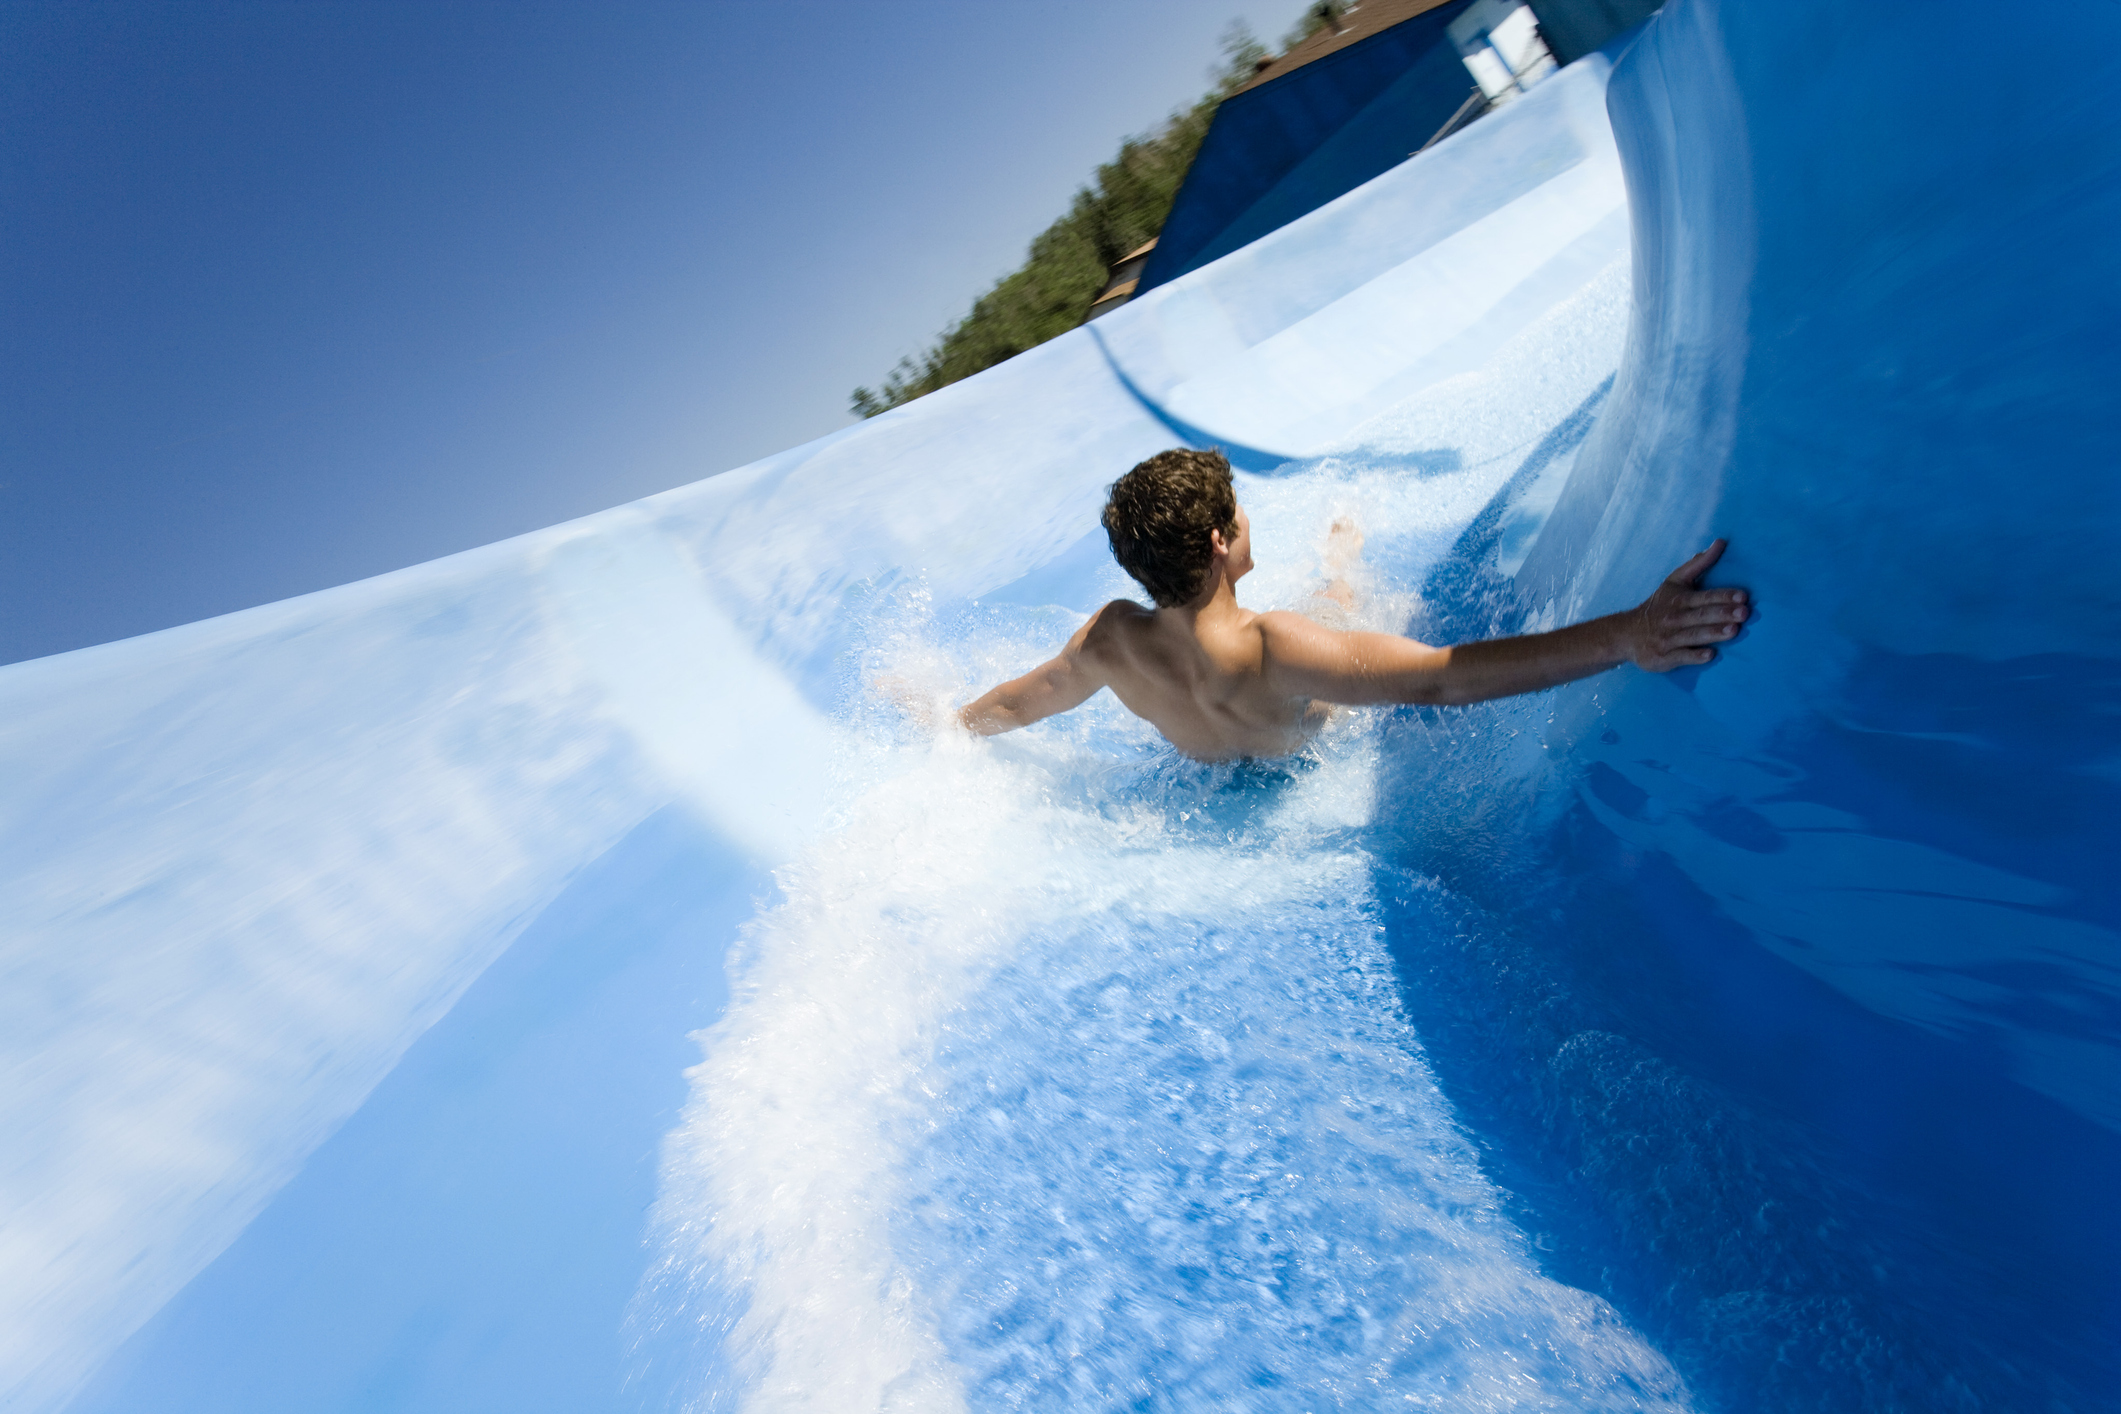 Man going down water slide at waterpark